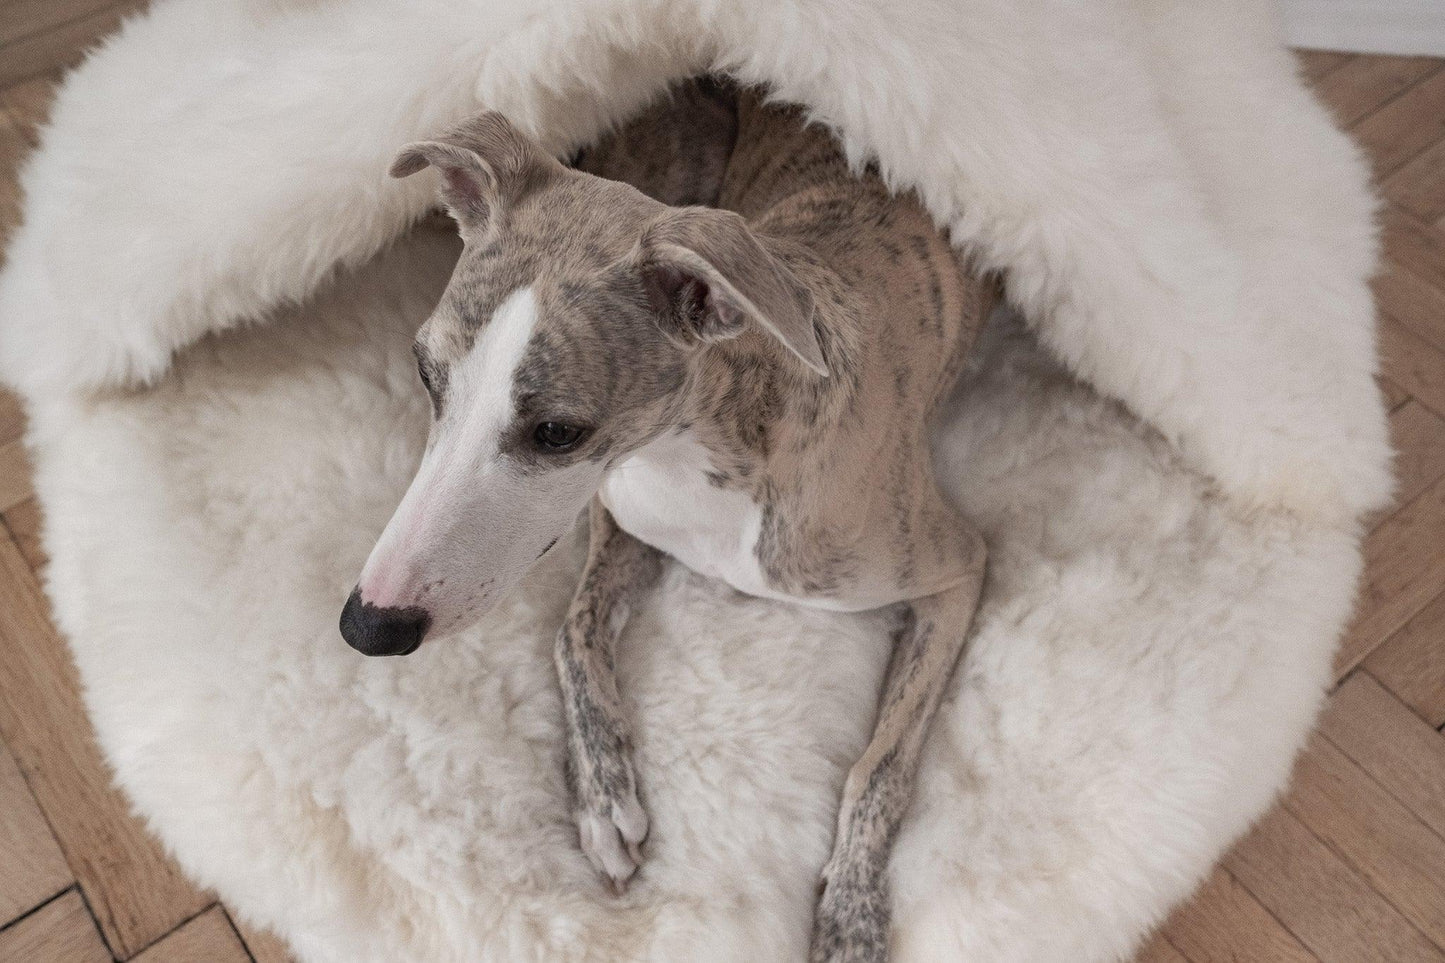 A greyhound dog resting in a Natural Sheepskin Pet Cave - White by Mellow Pet Store.